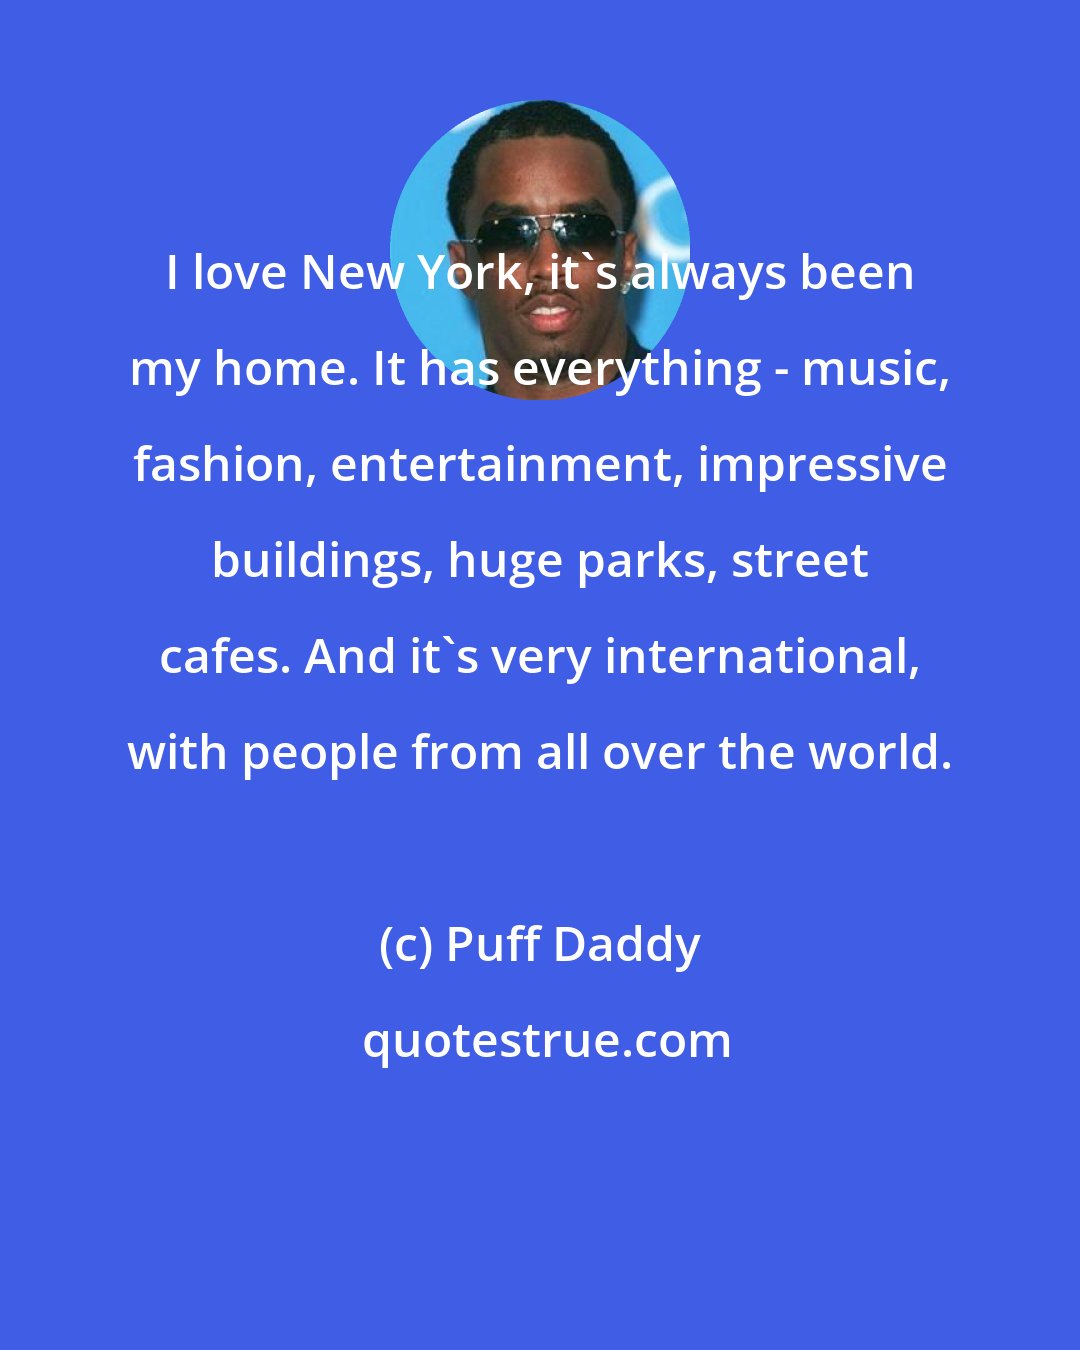 Puff Daddy: I love New York, it's always been my home. It has everything - music, fashion, entertainment, impressive buildings, huge parks, street cafes. And it's very international, with people from all over the world.